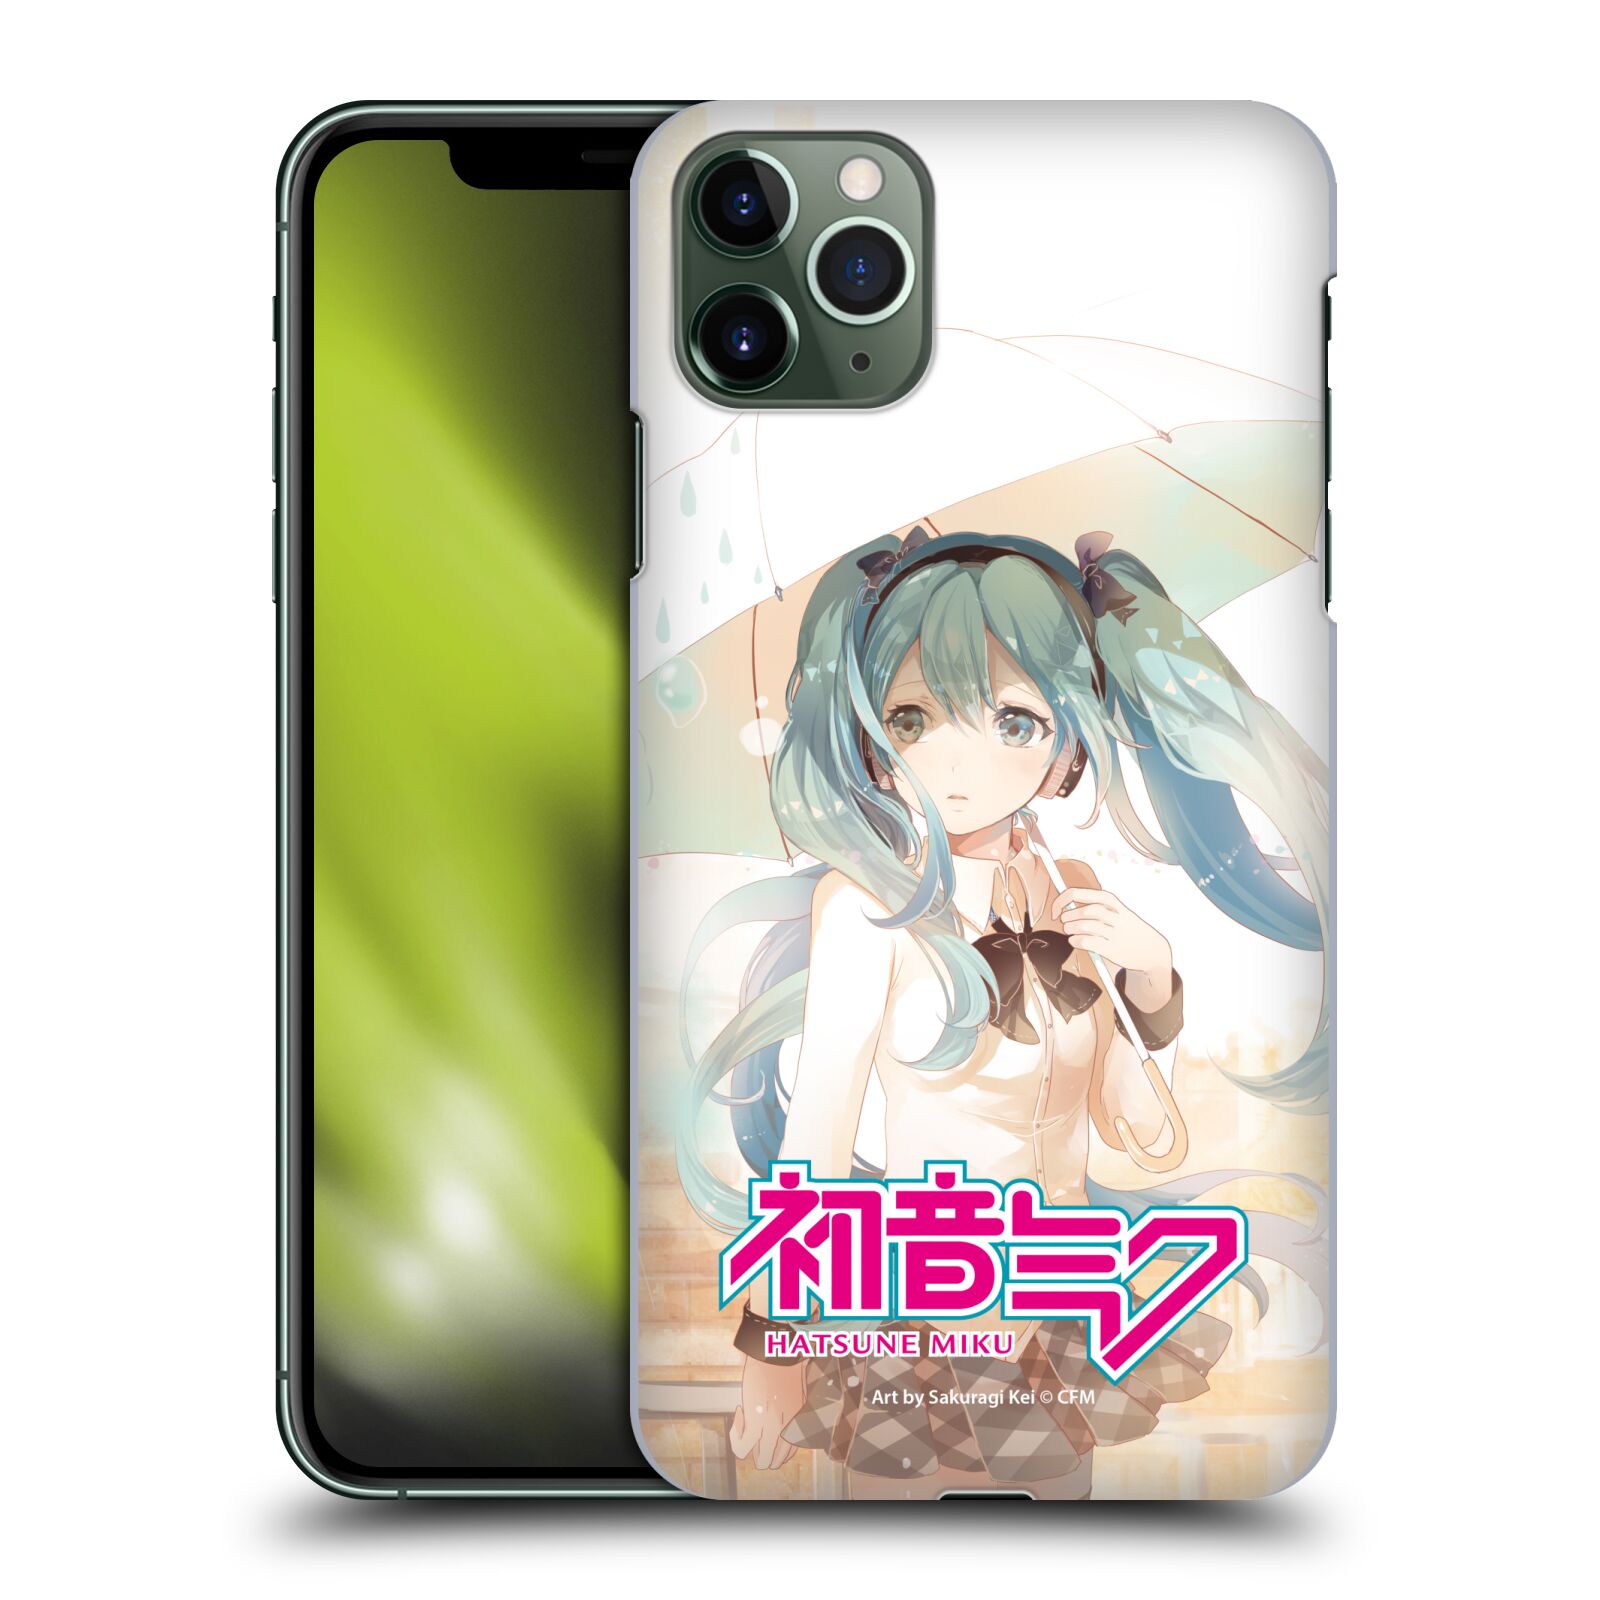 OFFICIAL HATSUNE MIKU GRAPHICS HARD BACK CASE FOR APPLE iPHONE 